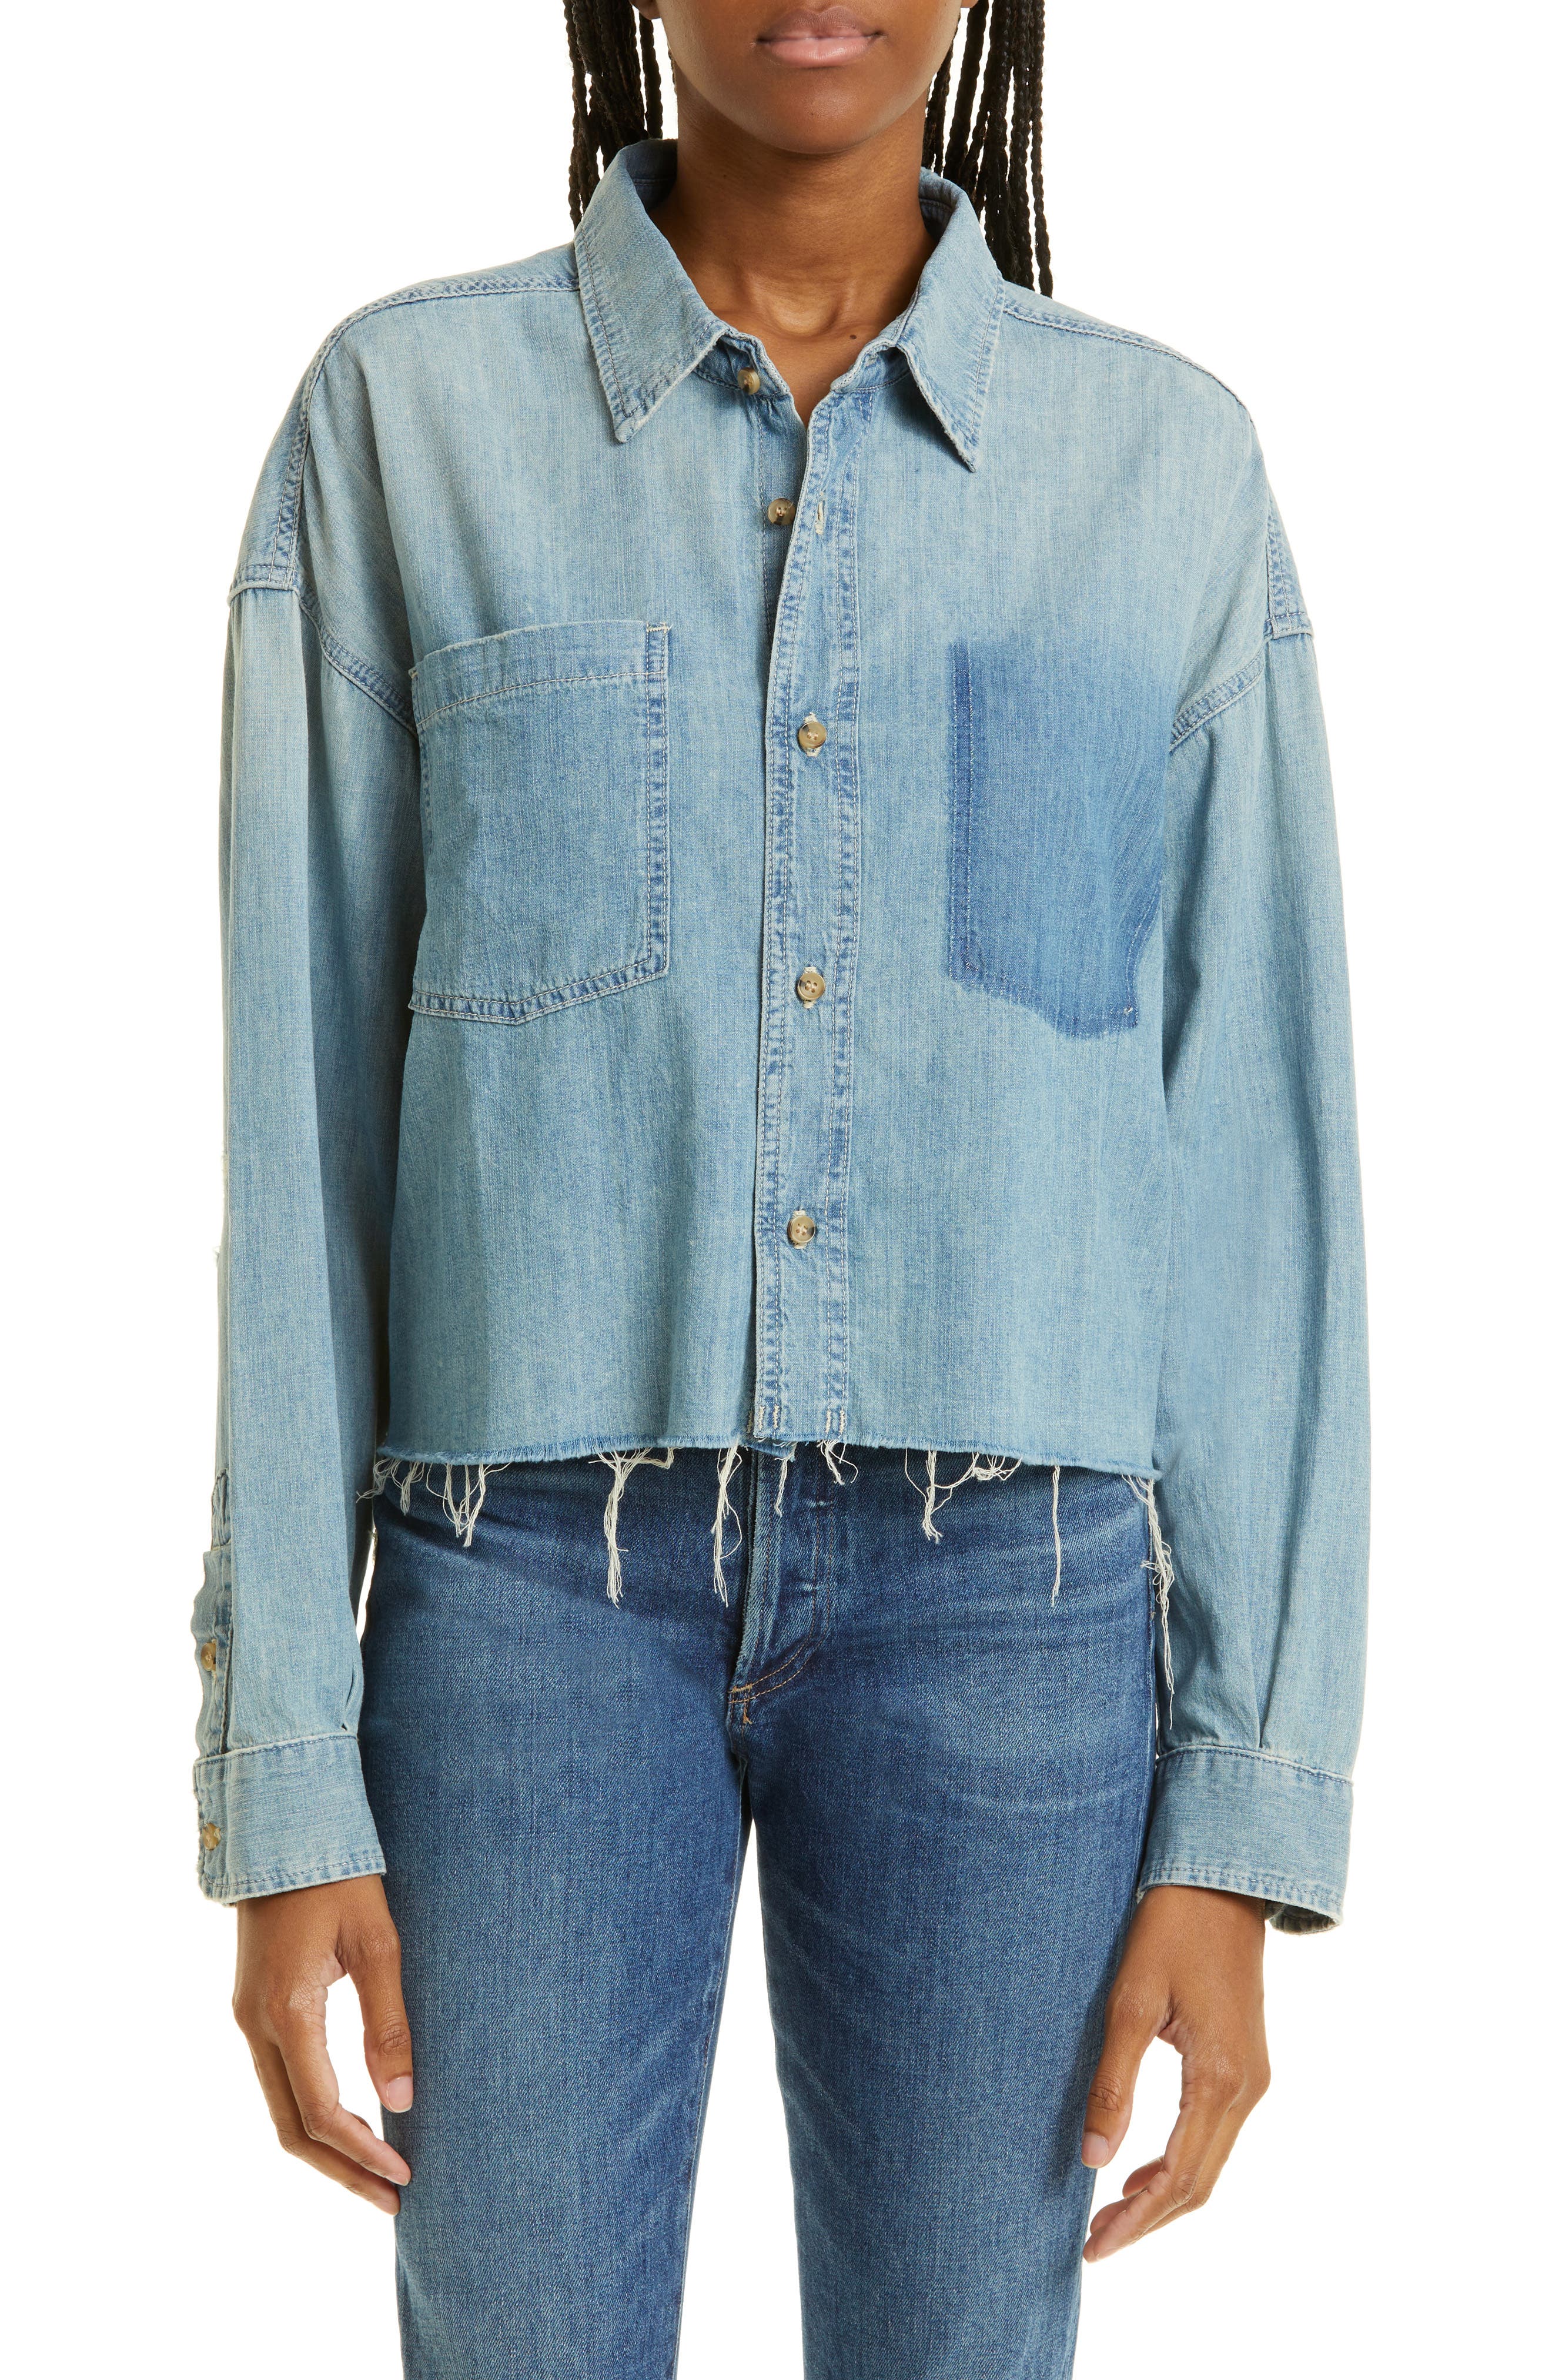 The Roomie Double Frenchie Crop Denim Shirt in Anything But Easy at Nordstrom Nordstrom Women Clothing Shirts Denim Shirts 